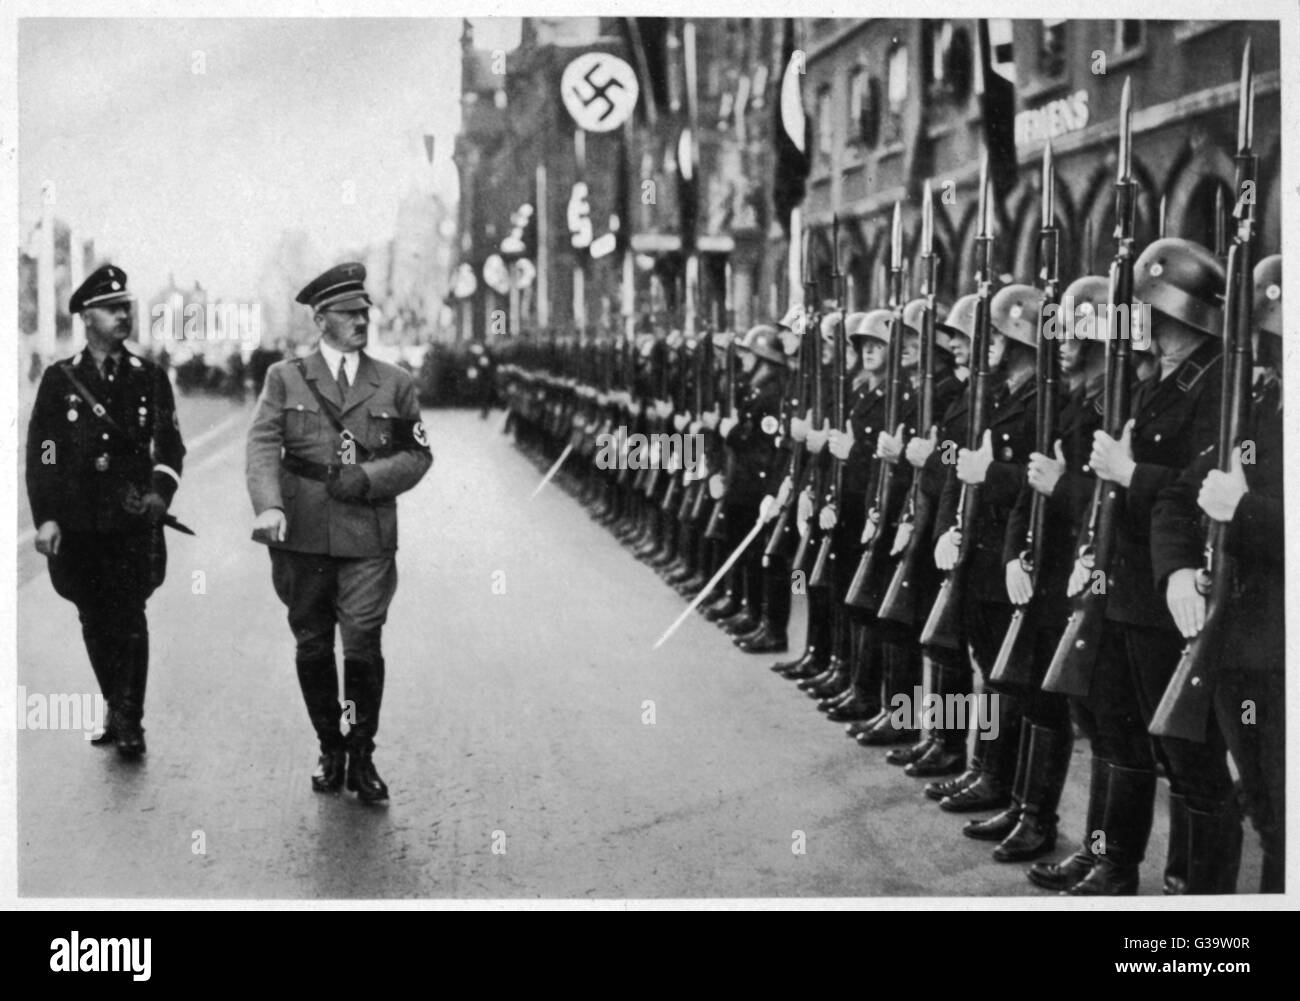 ADOLF HITLER  Inspecting troops at the  Nuremberg Parteitag in 1935 with Heinrich Himmler     Date: 1935 Stock Photo